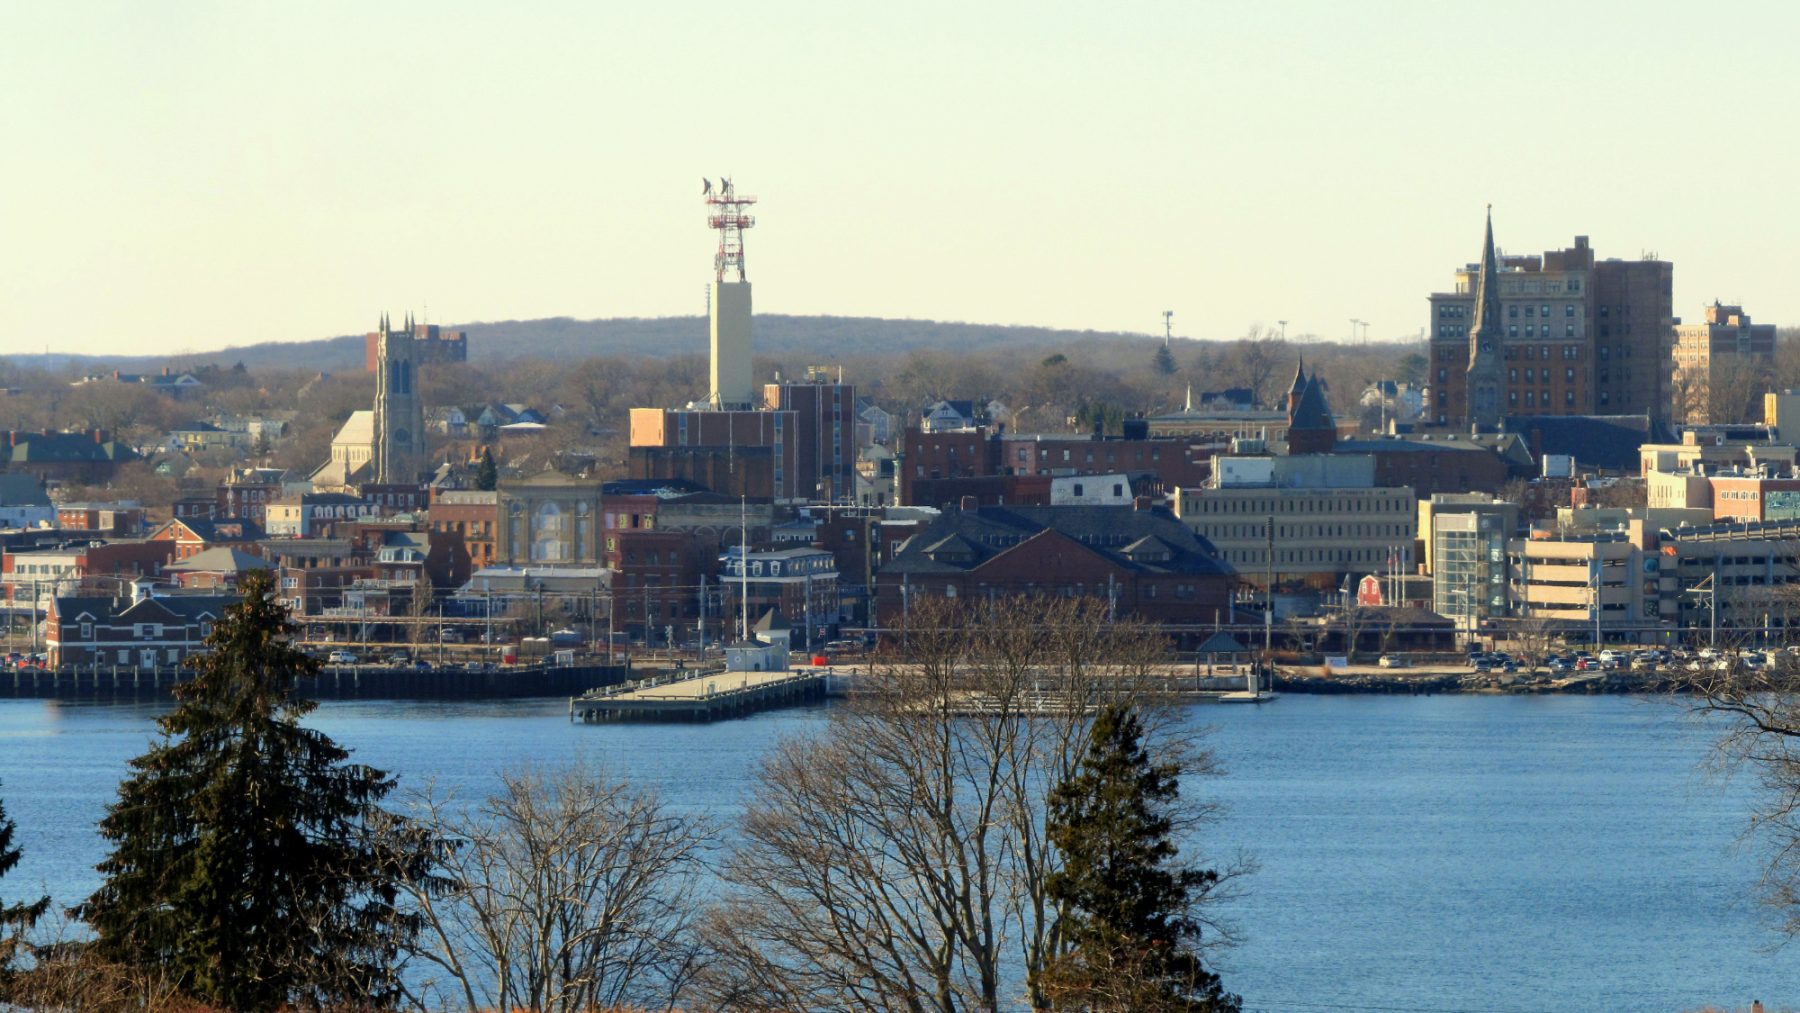 New London skyline from Fort Griswold